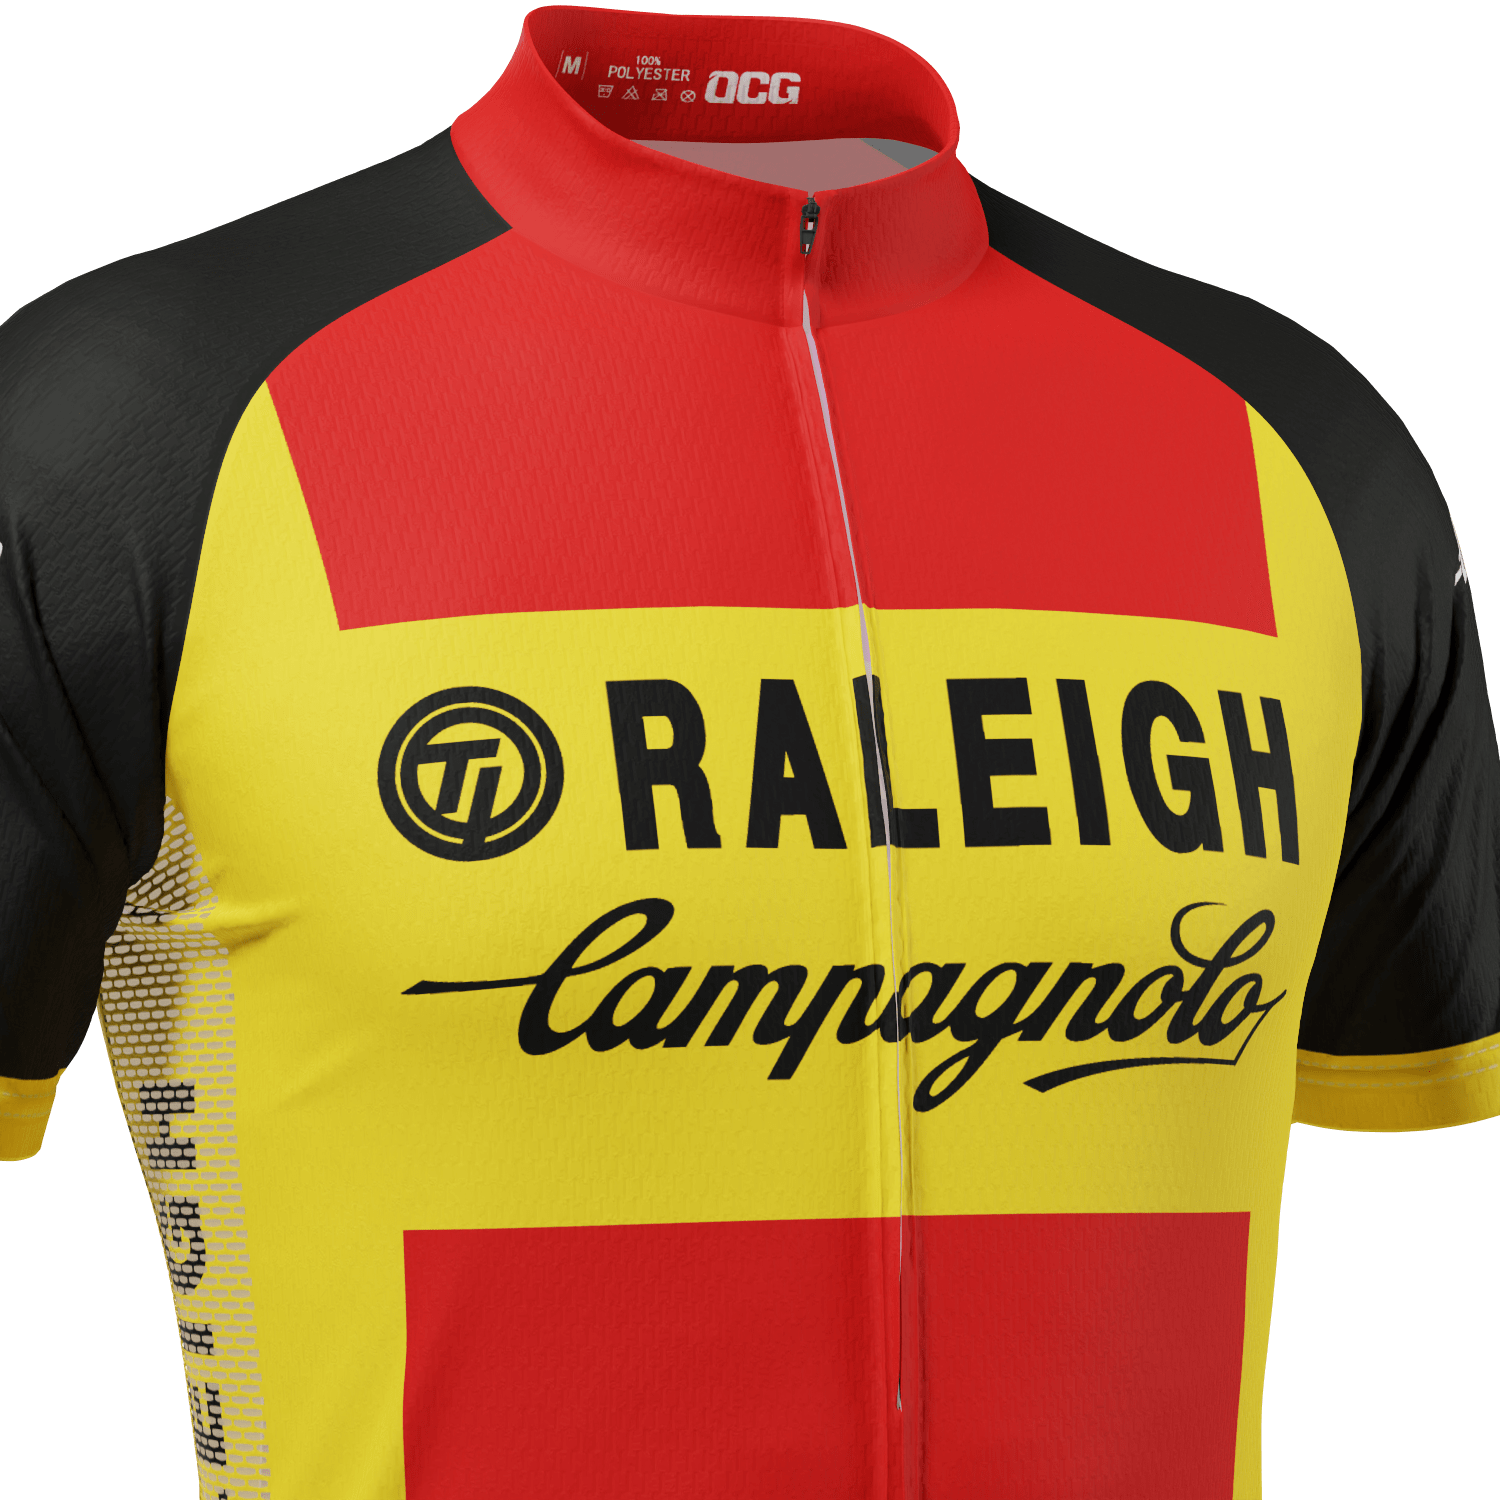 Men's Raleigh Campagnolo Retro Team Short Sleeve Cycling Jersey